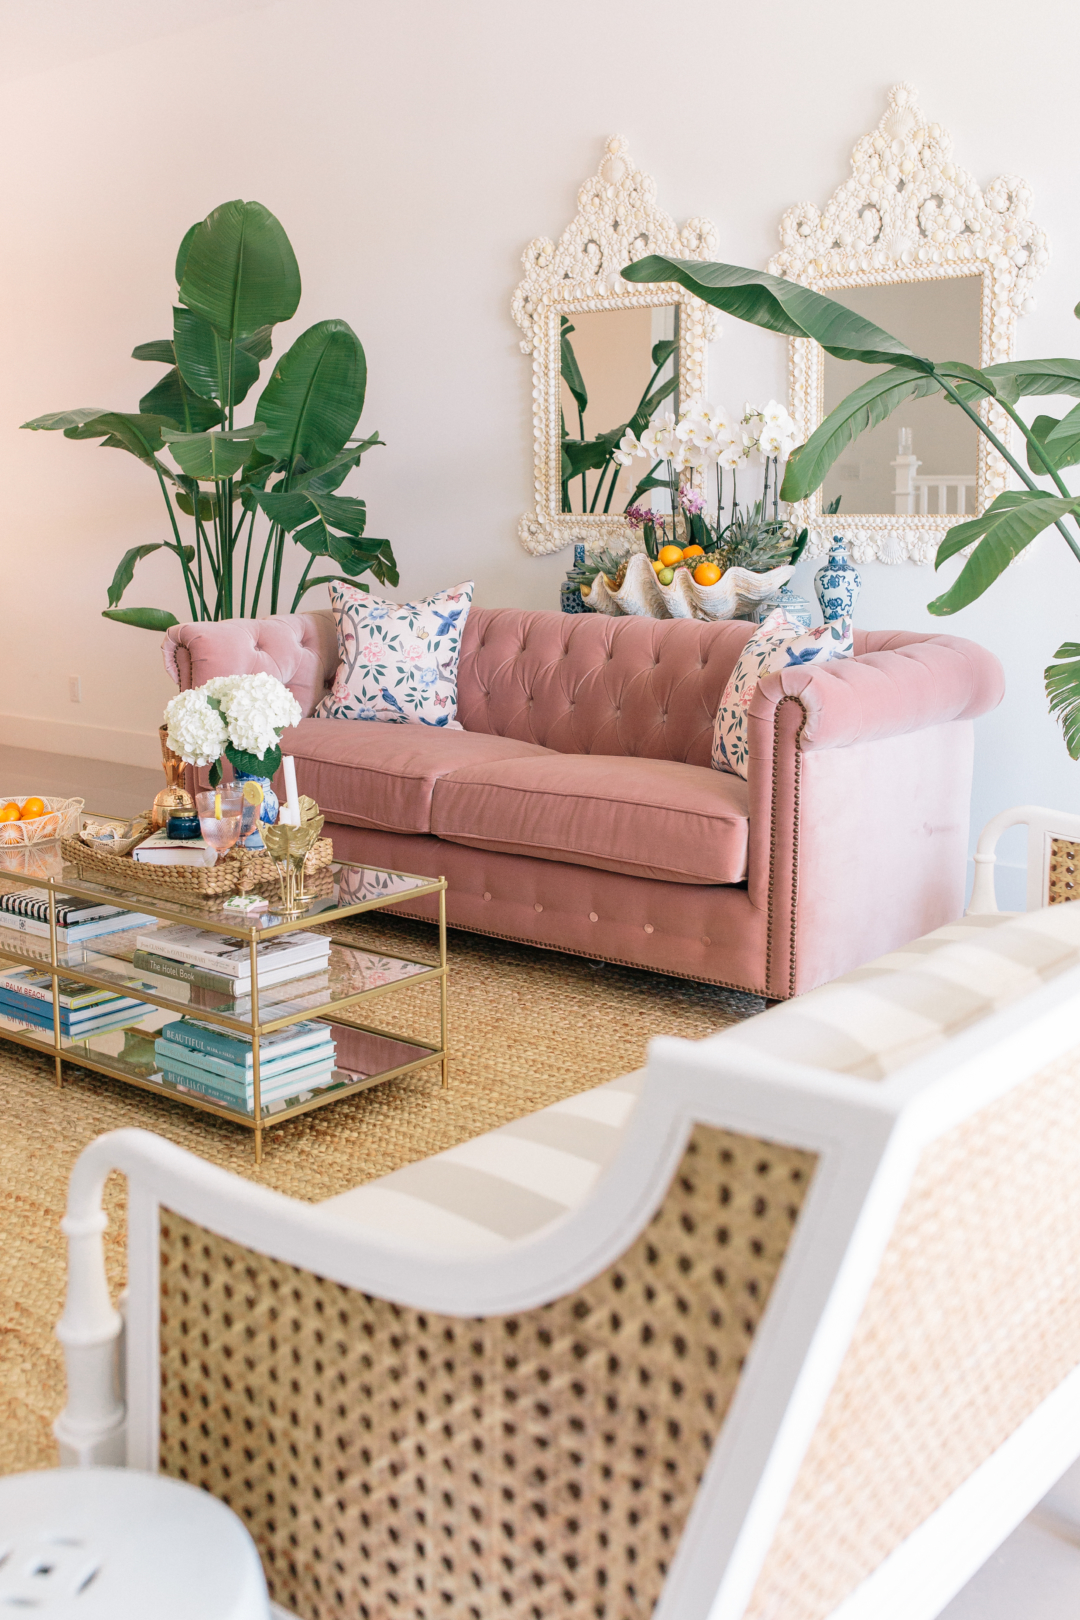 Home: Danielle from Palm Beach Lately's Living Room 